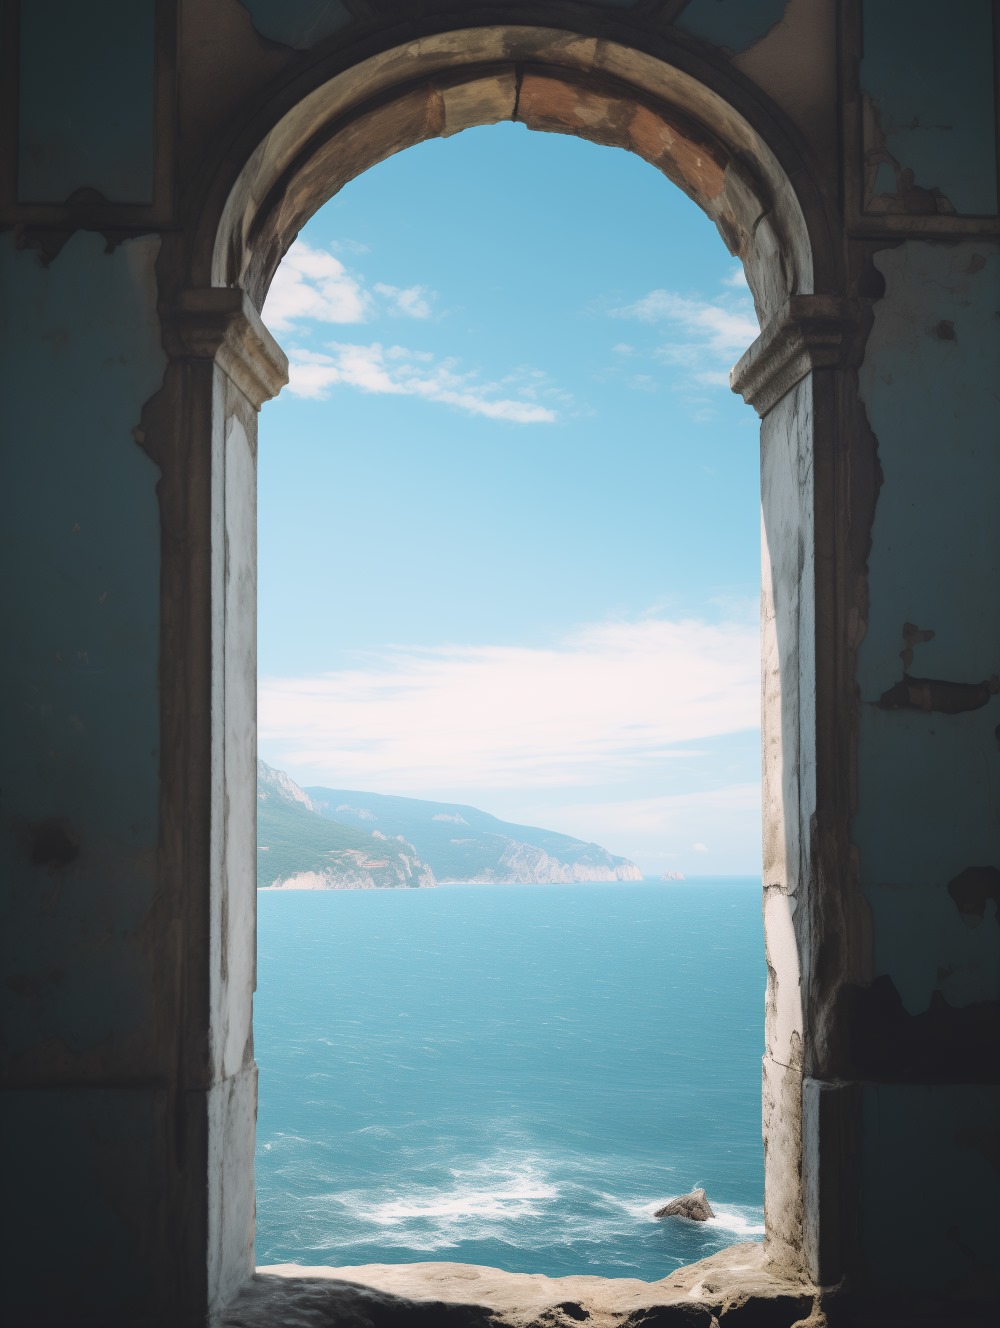 An antique window view to the soft blue ocean